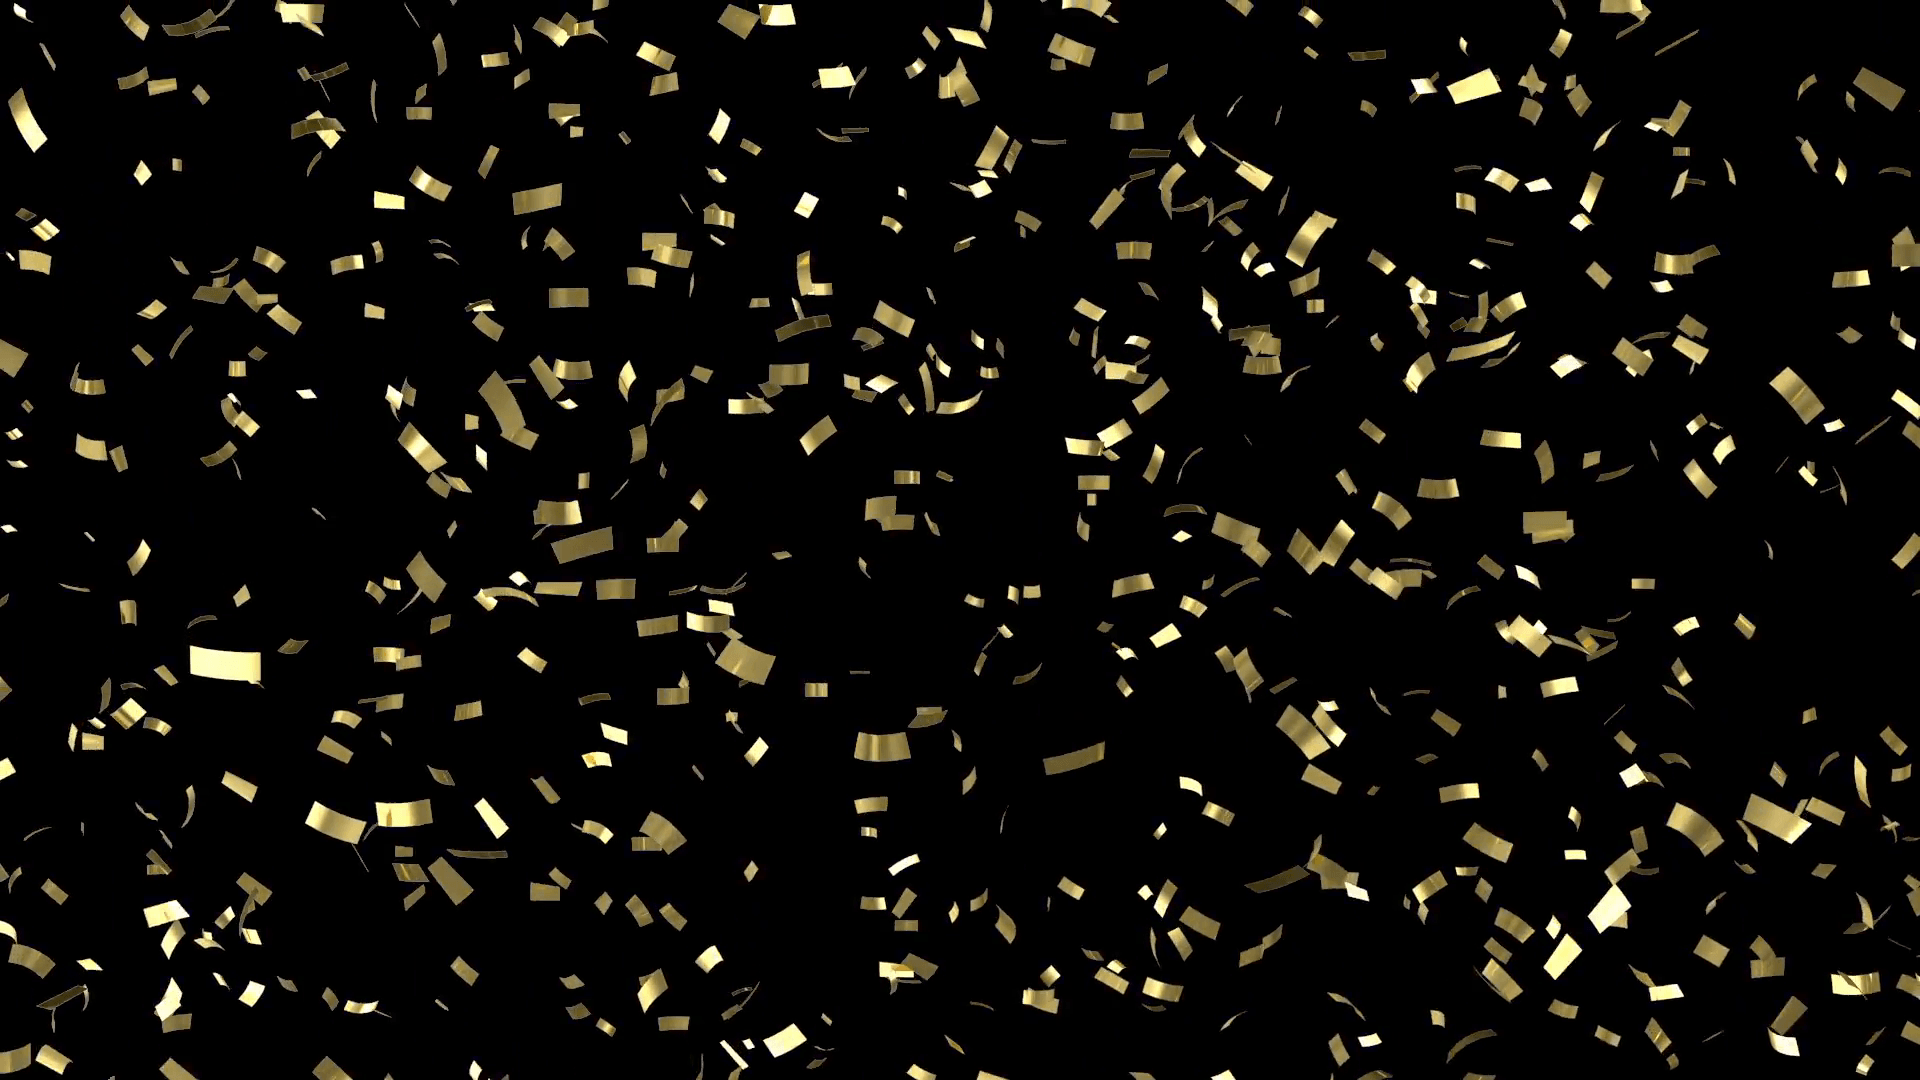 Falling Golden Confetti on black background. HQ Seamless Looping